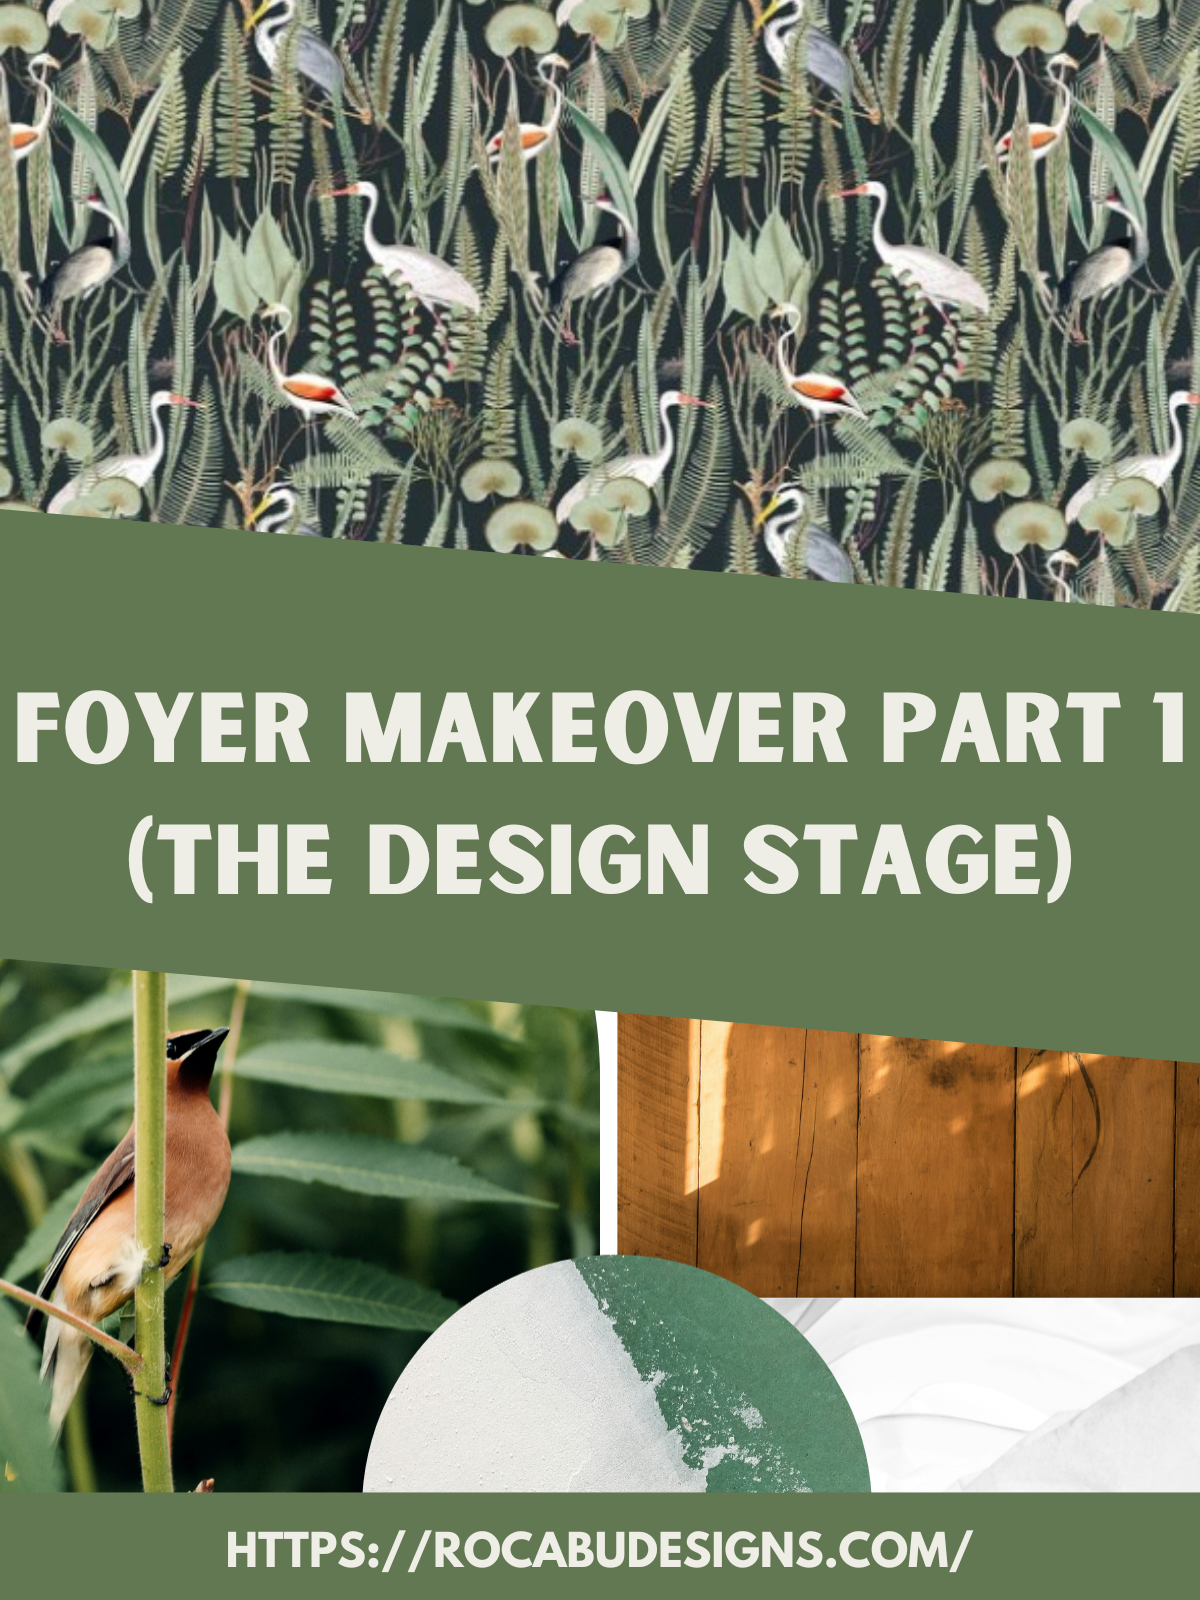 Foyer Makeover Part 1 (The Design Stage)